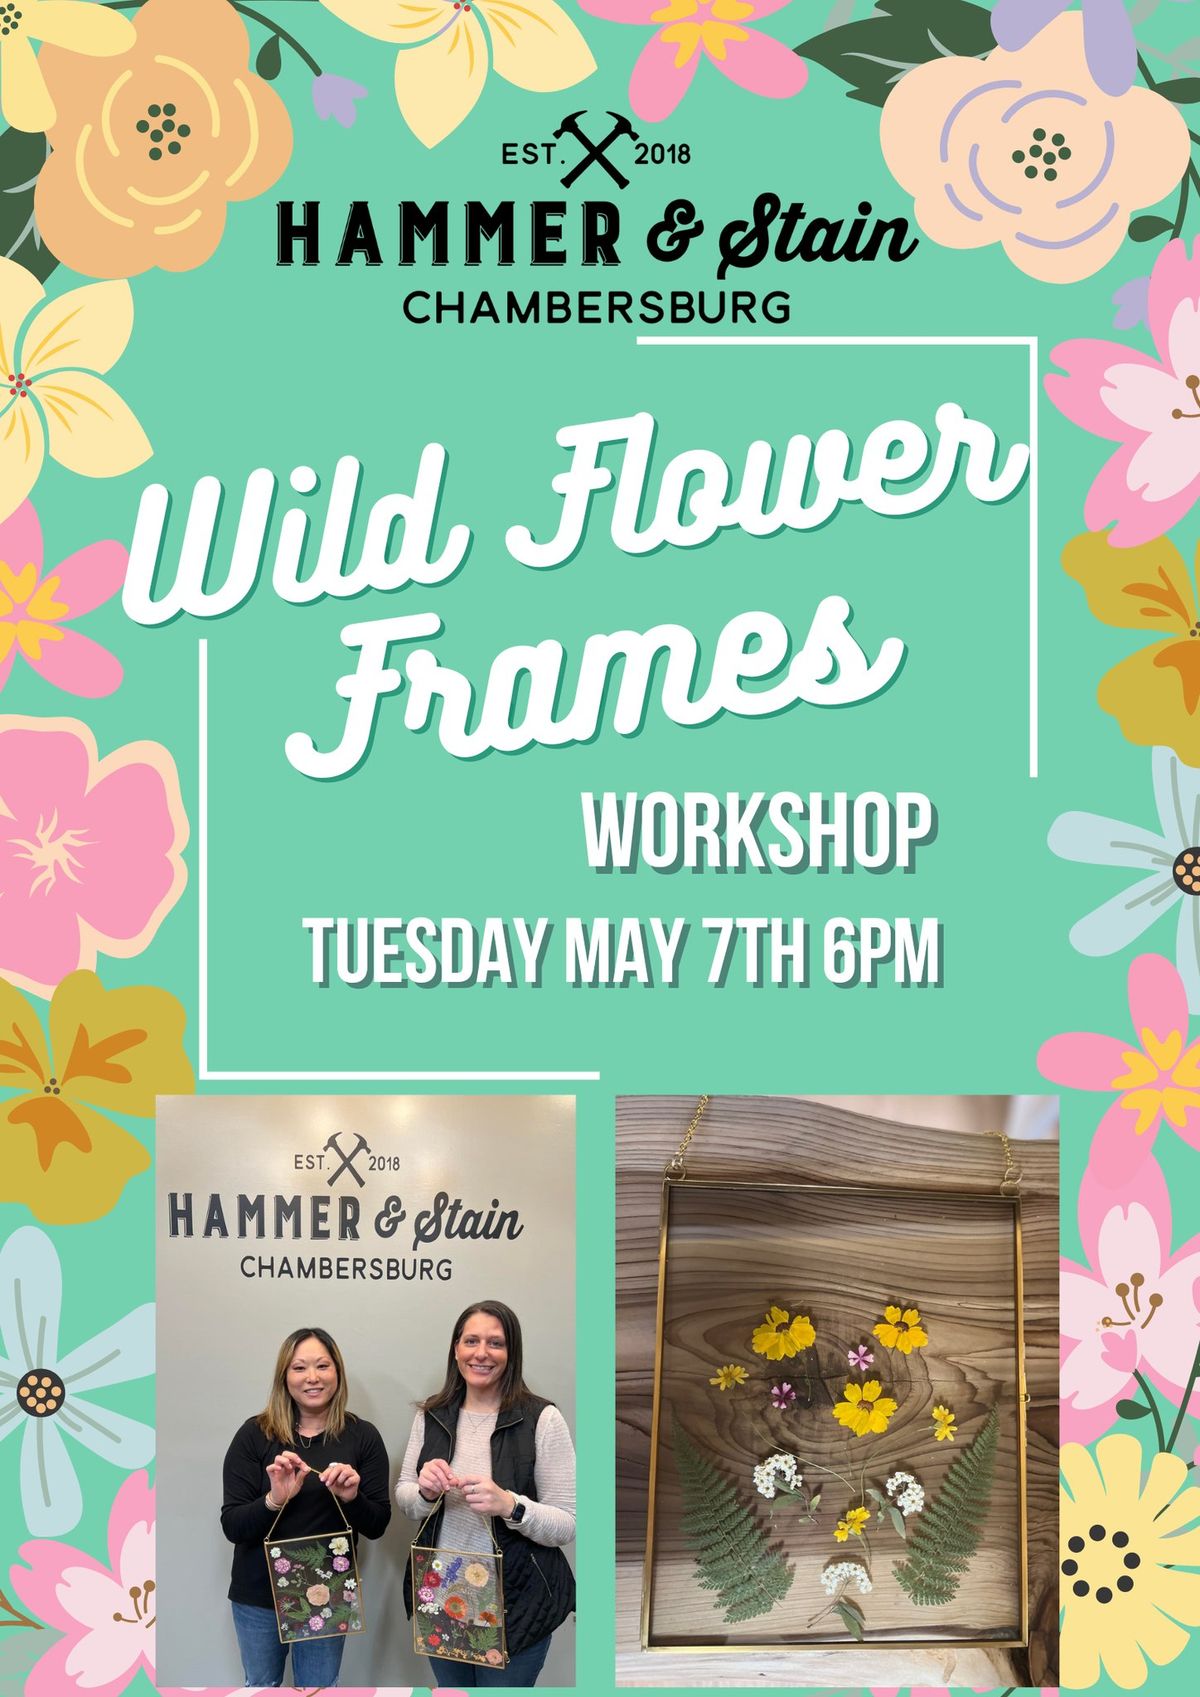 Tuesday May 7th- Pressed Wildflower Frames Workshop 6pm